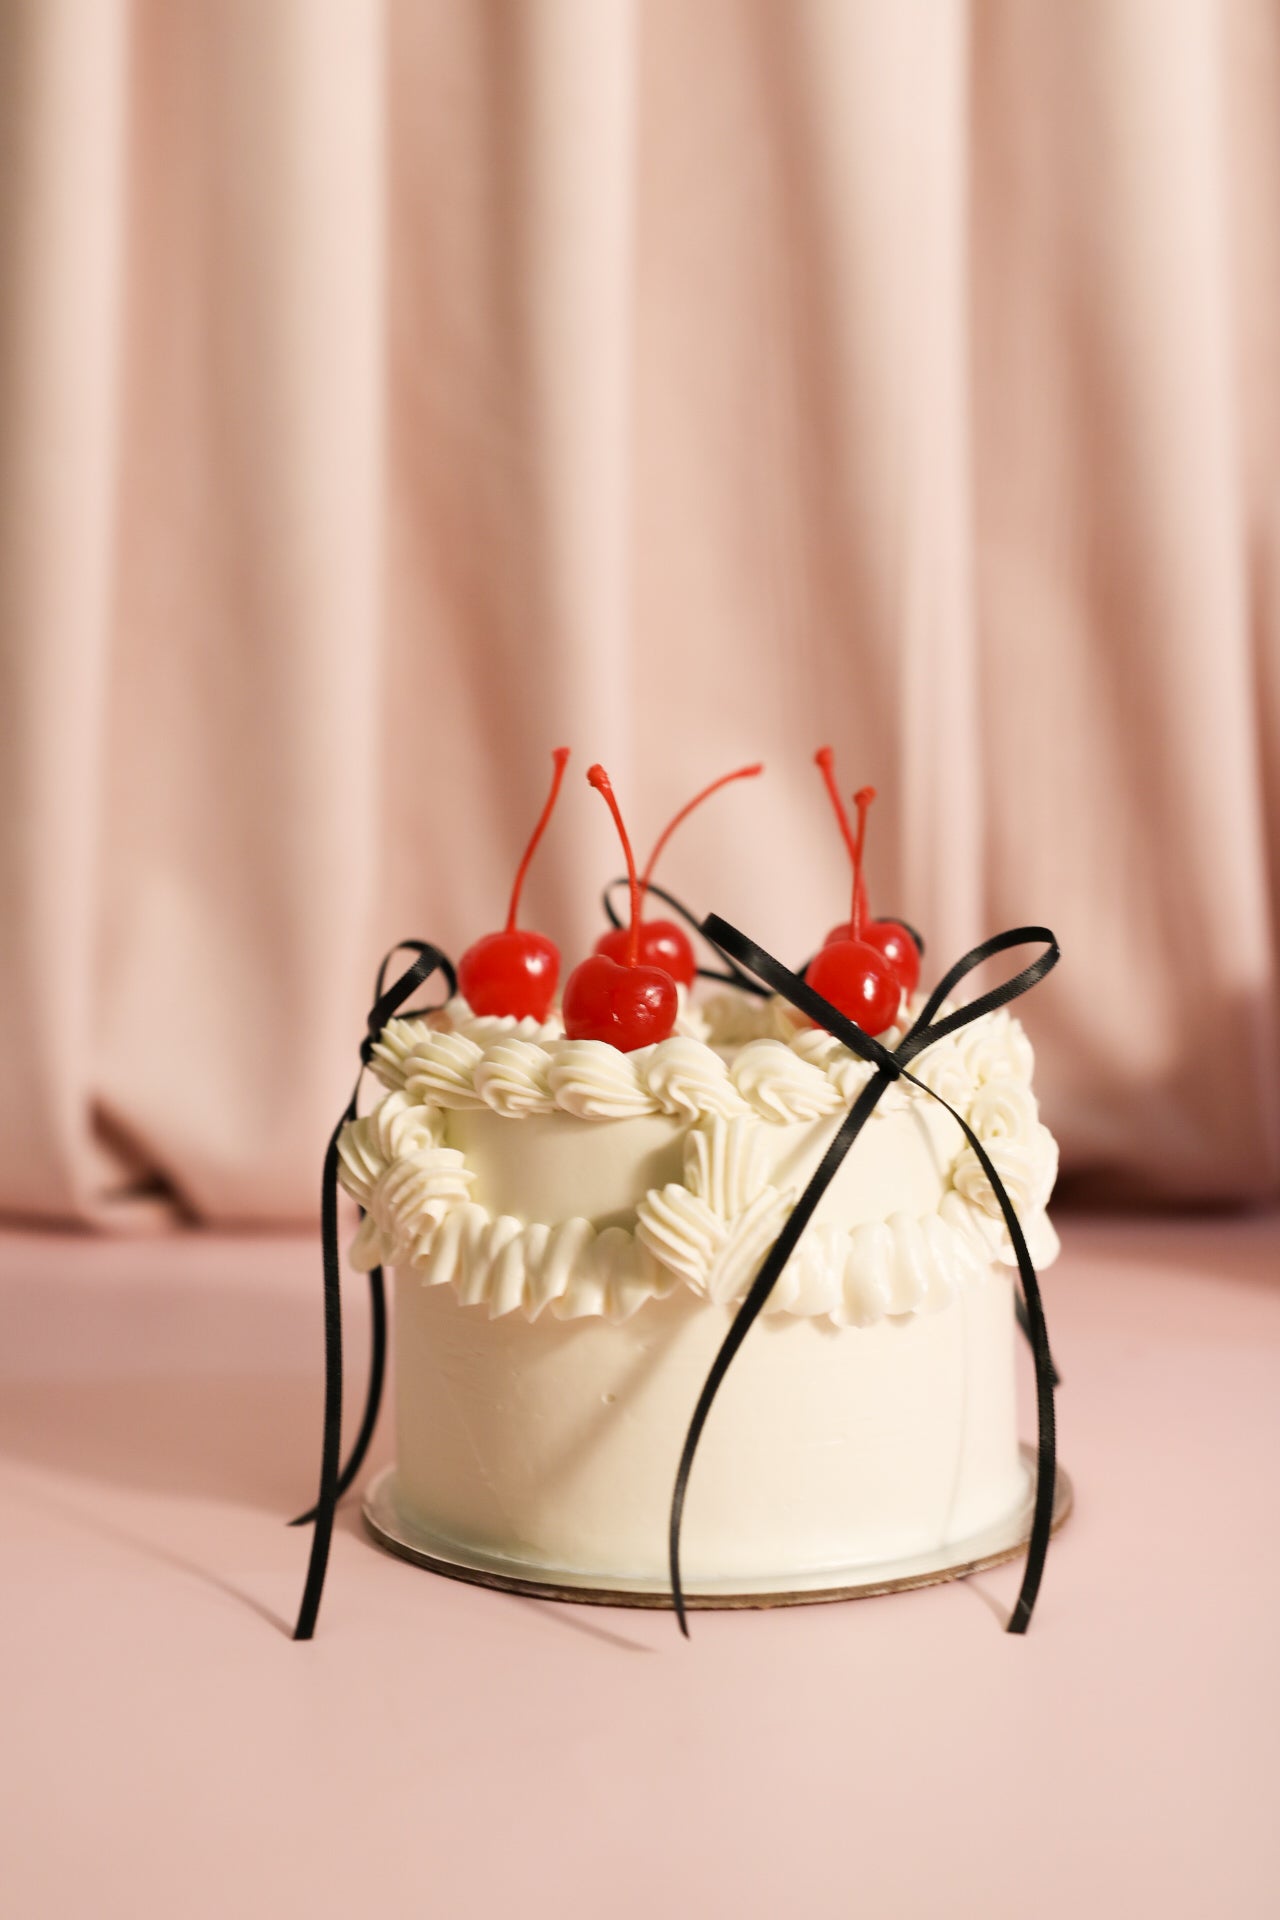 Vintage Cake Decorating Class - March 17th